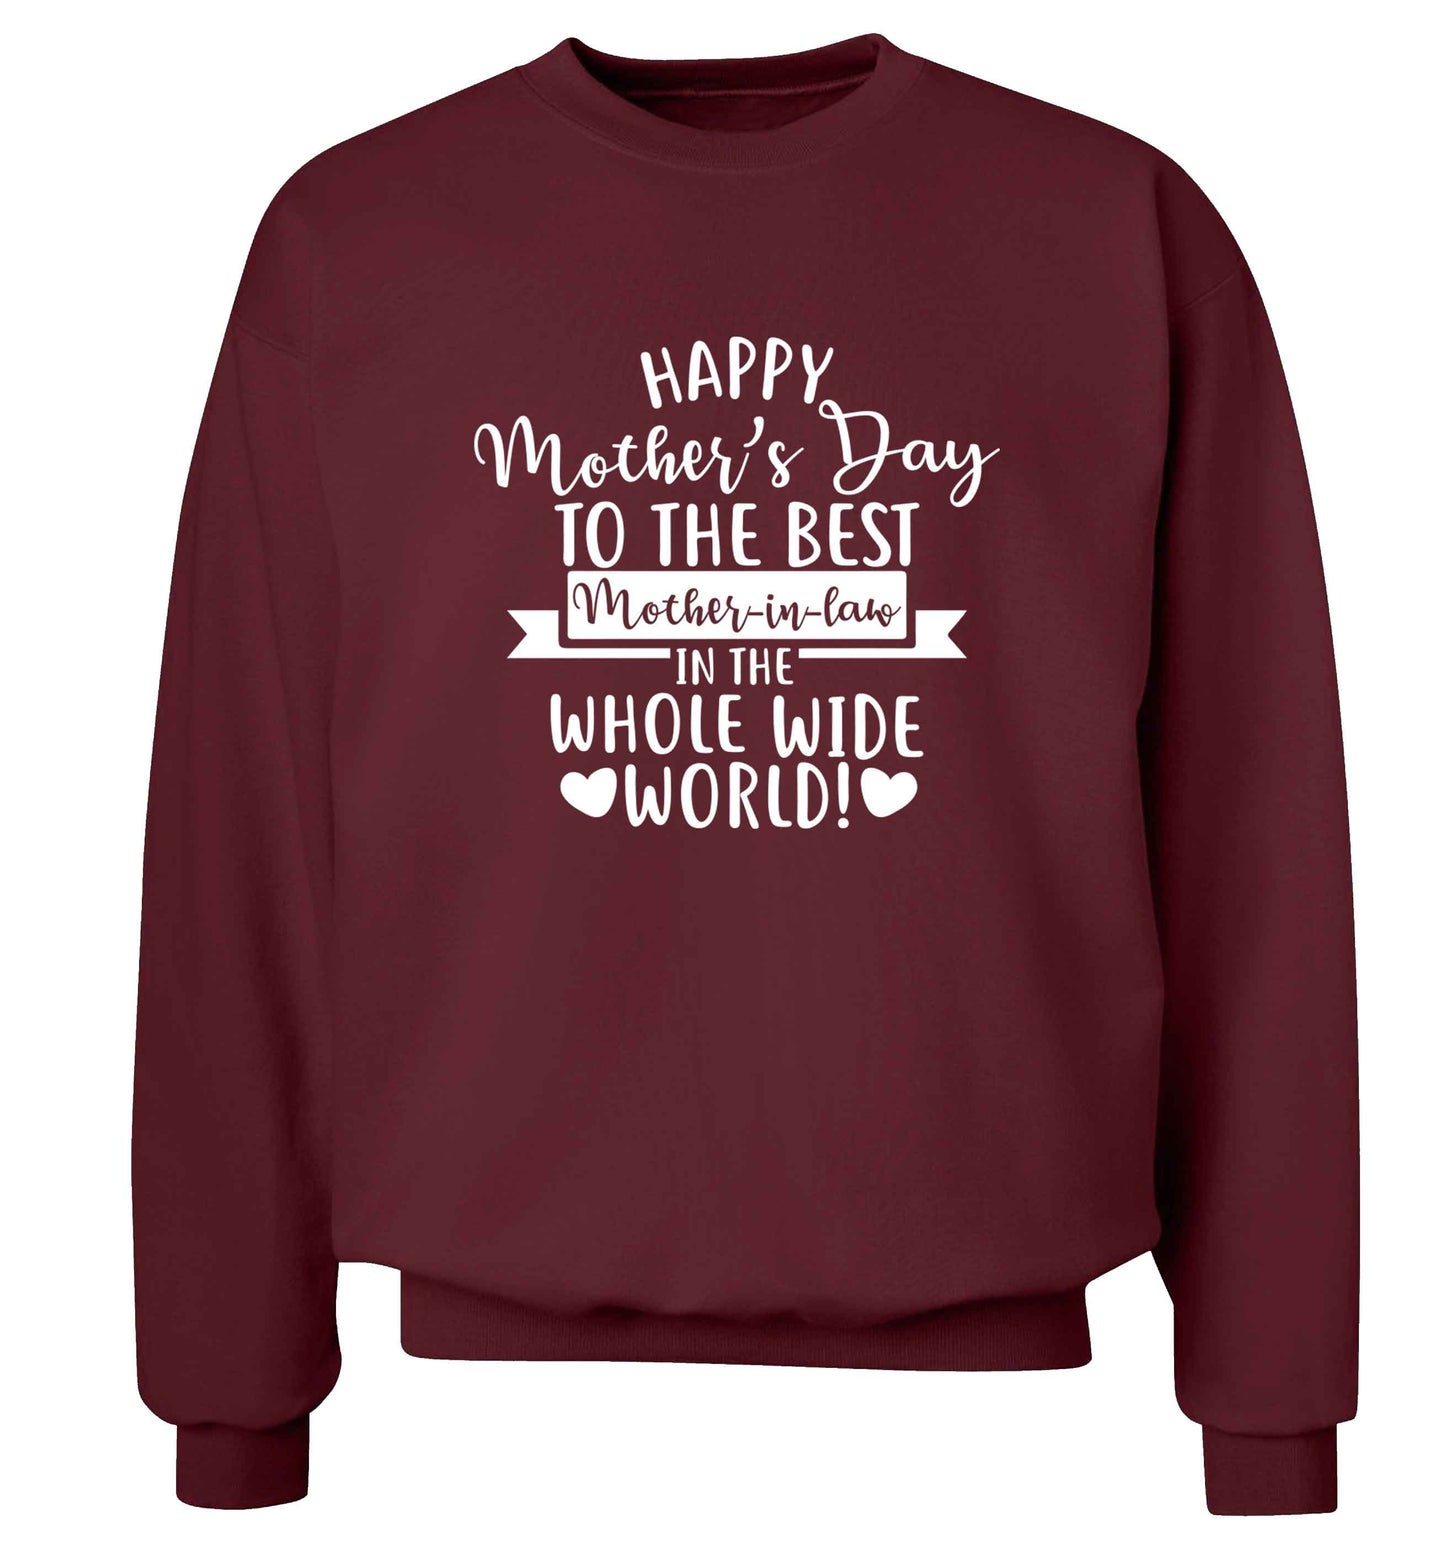 Happy mother's day to the best mother-in law in the world adult's unisex maroon sweater 2XL